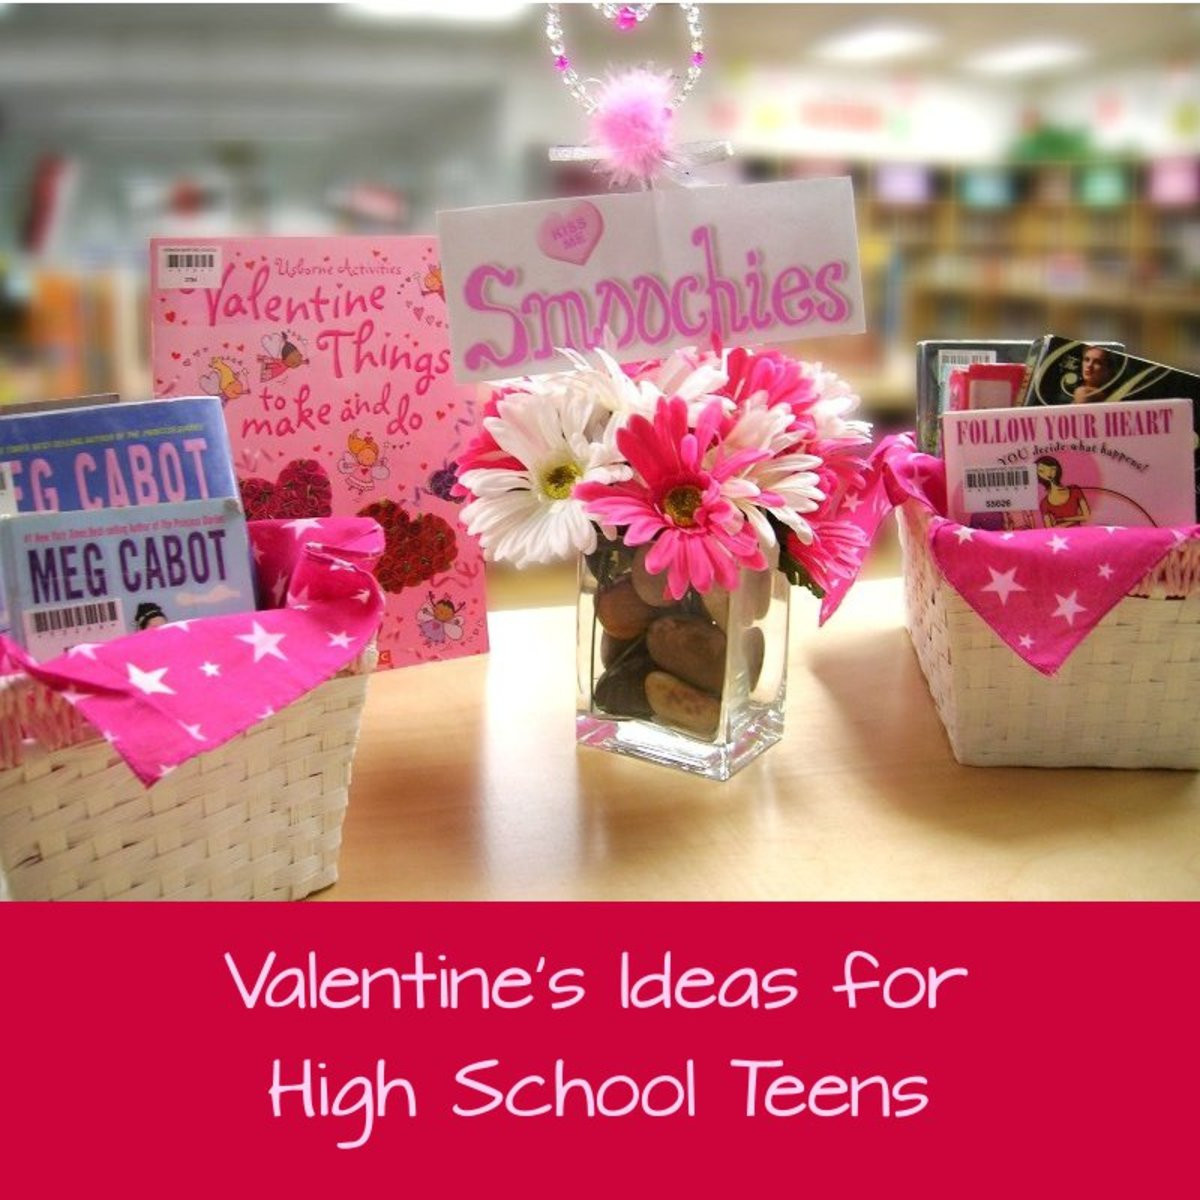 Valentines Gift Ideas For Teens
 Valentine s Day Gift Ideas for High School Teens